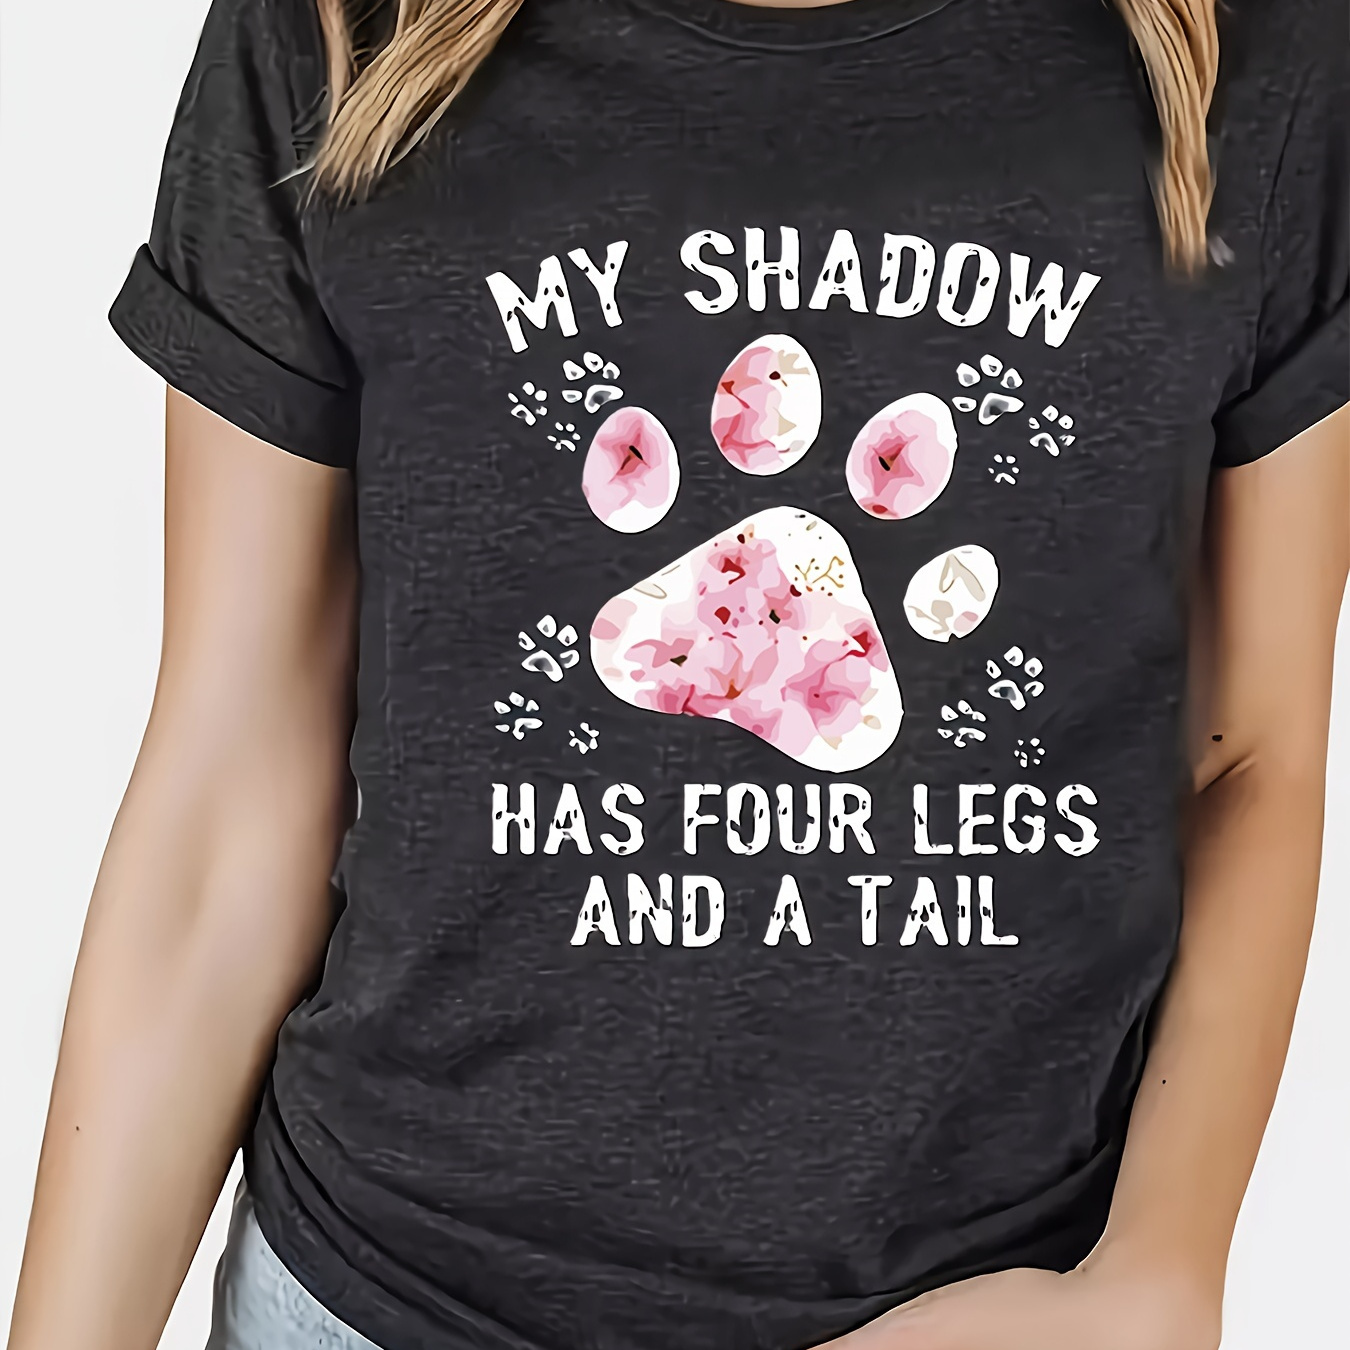 

Plus Size Dog Paw Print T-shirt, Short Sleeve Crew Neck Casual Top For Summer & Spring, Women's Plus Size Clothing